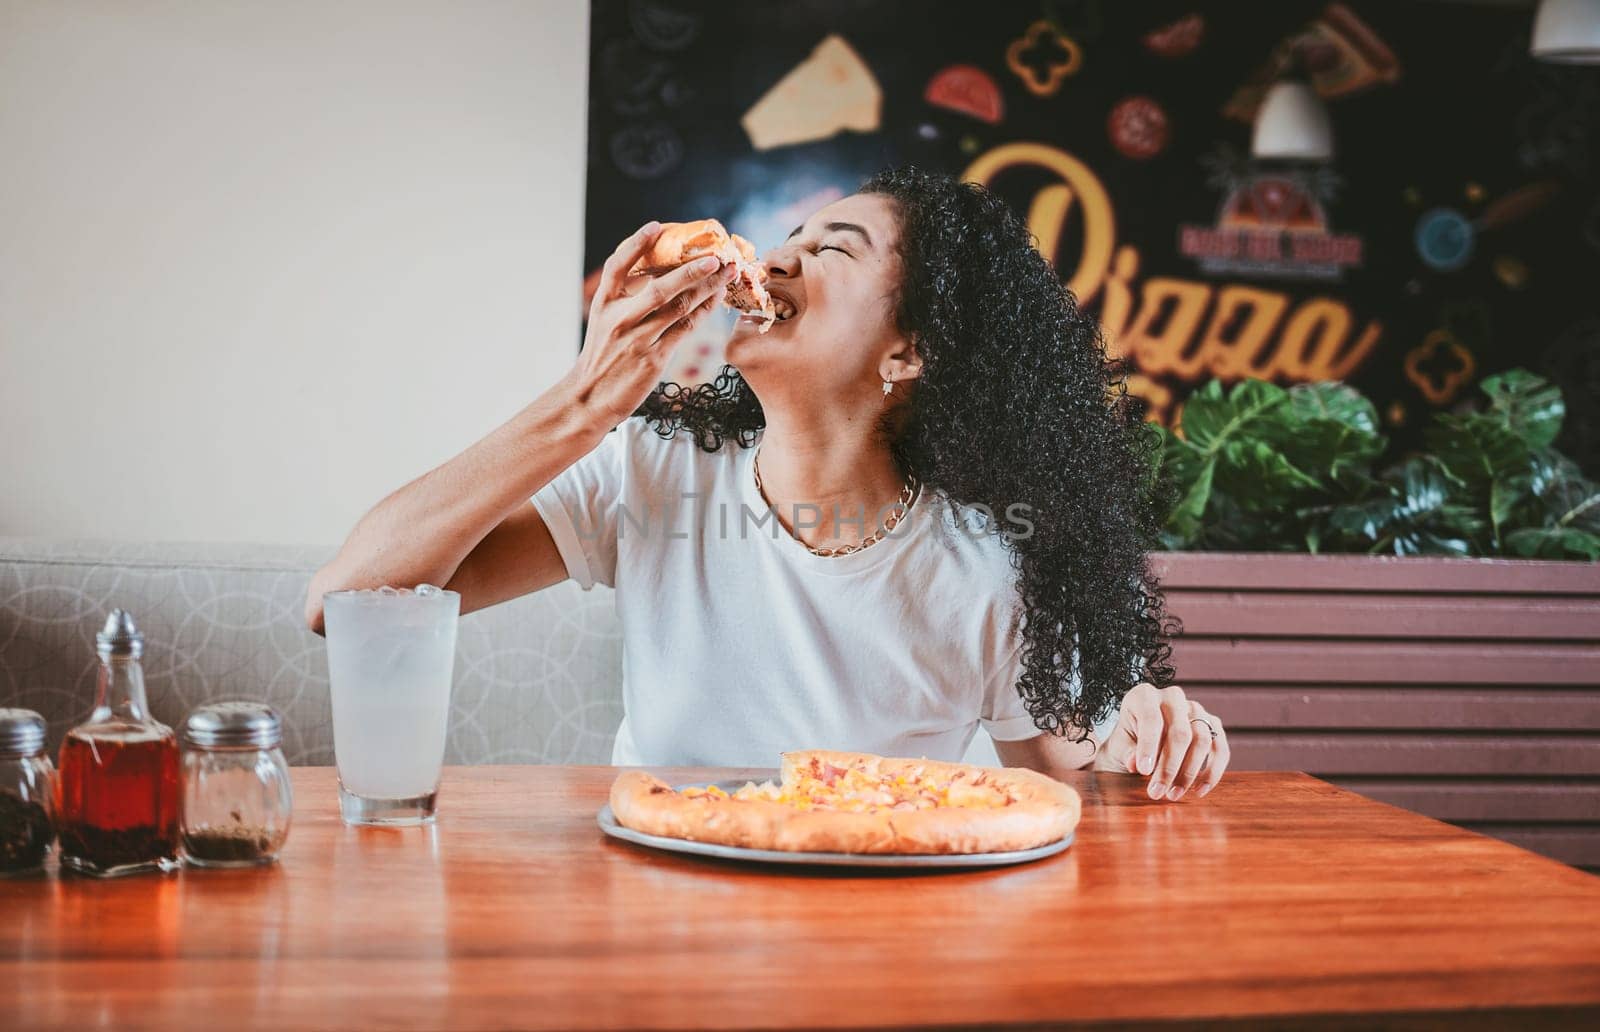 Lifestyle of afro-haired woman enjoying a pizza in a restaurant. Happy afro hair woman eating pizza in a restaurant by isaiphoto